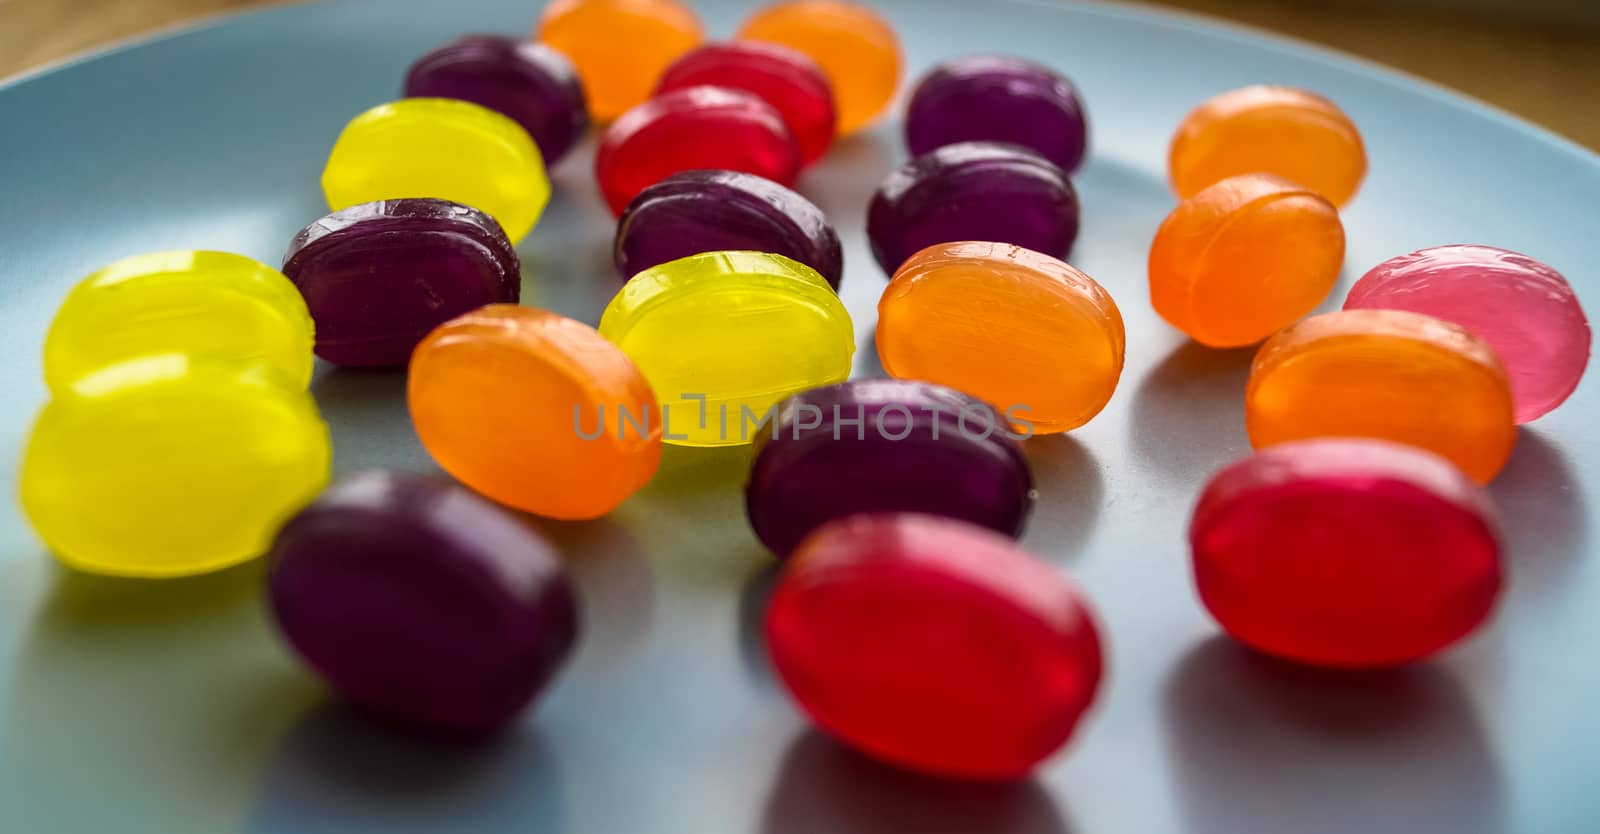 colored candy lollipops laid out on the plate